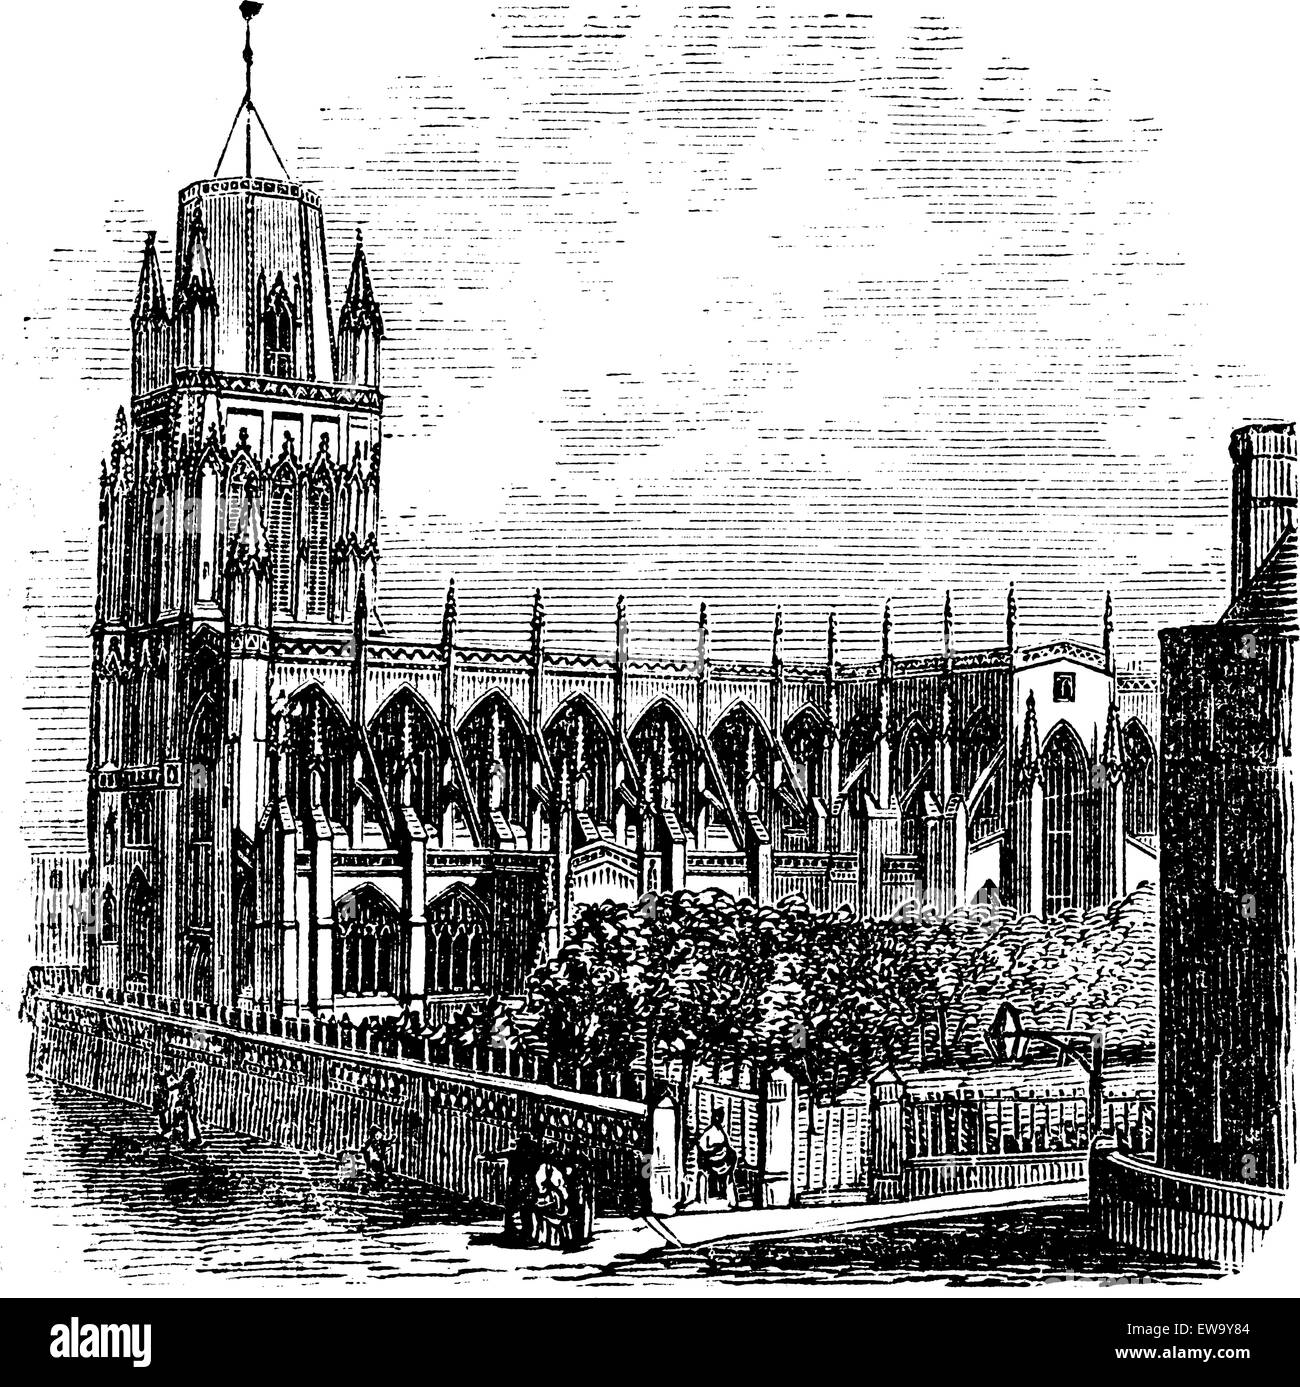 Saint Mary Redcliffe - Anglican church in Bristol, England (United Kingdom). Vintage Engraving from 1890s. Old engraved illustration of the Saint-Mary Redcliffe. Stock Vector